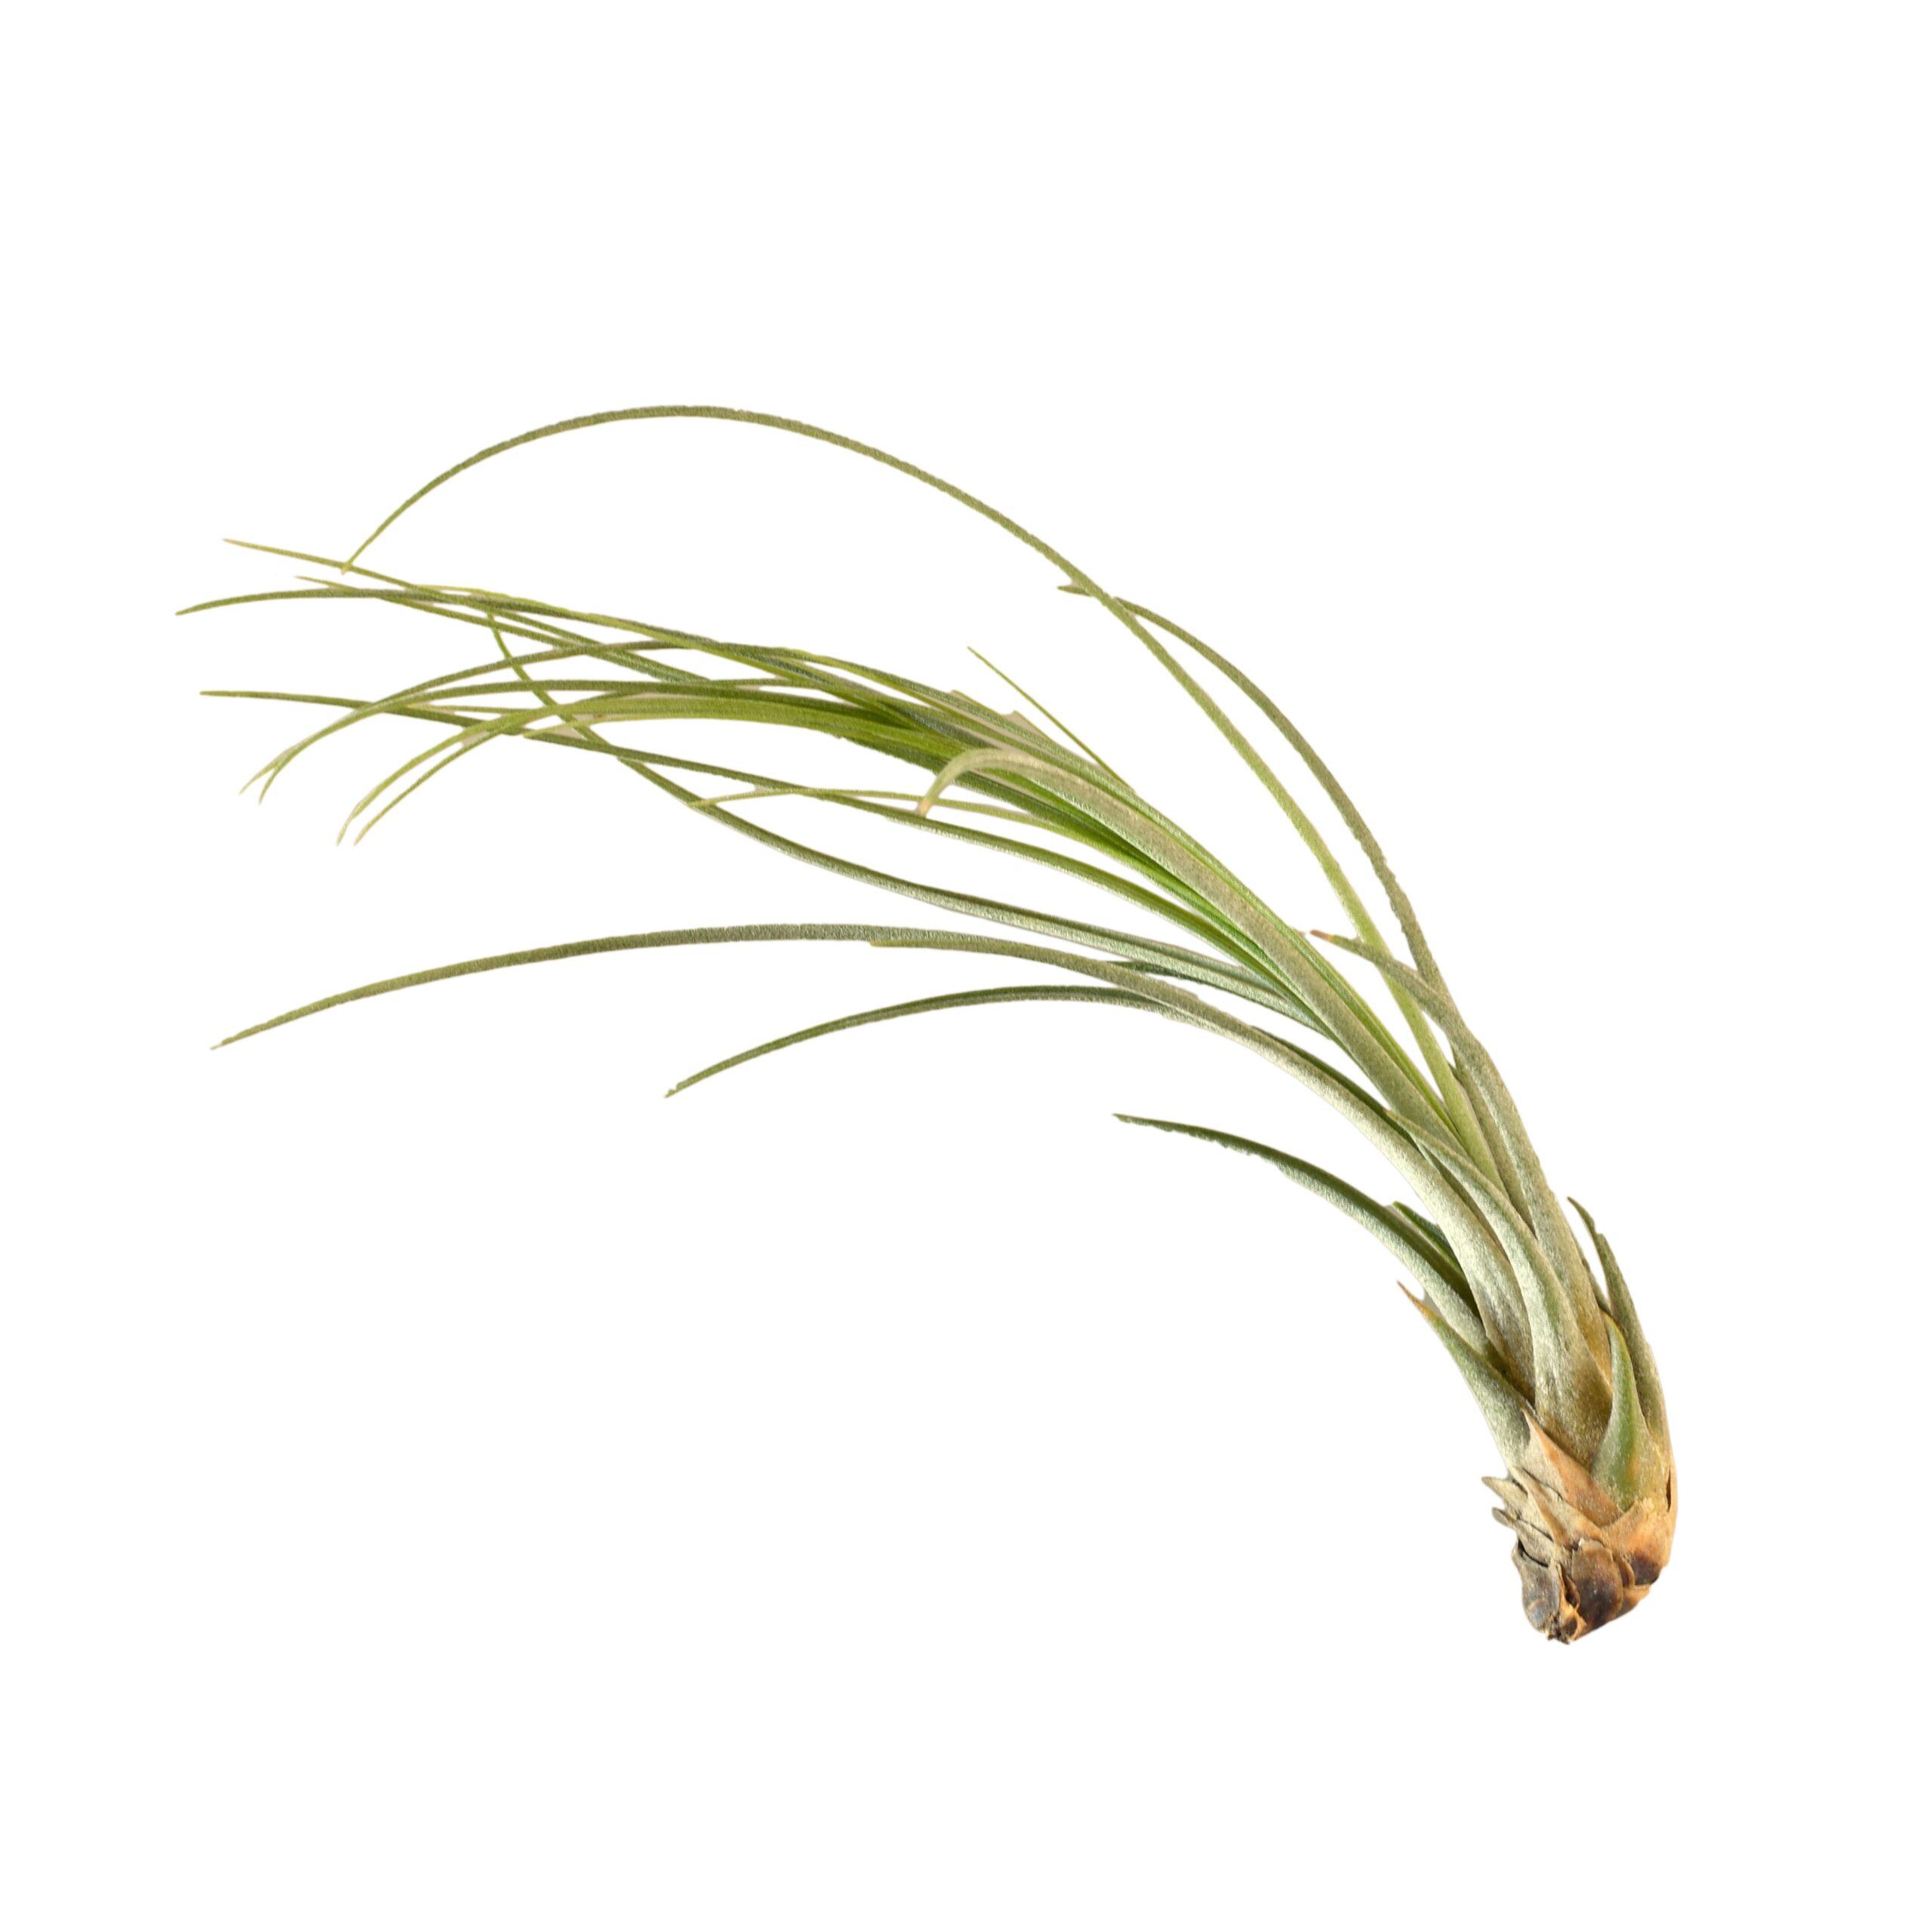 An air plant on a white background in a garden center.